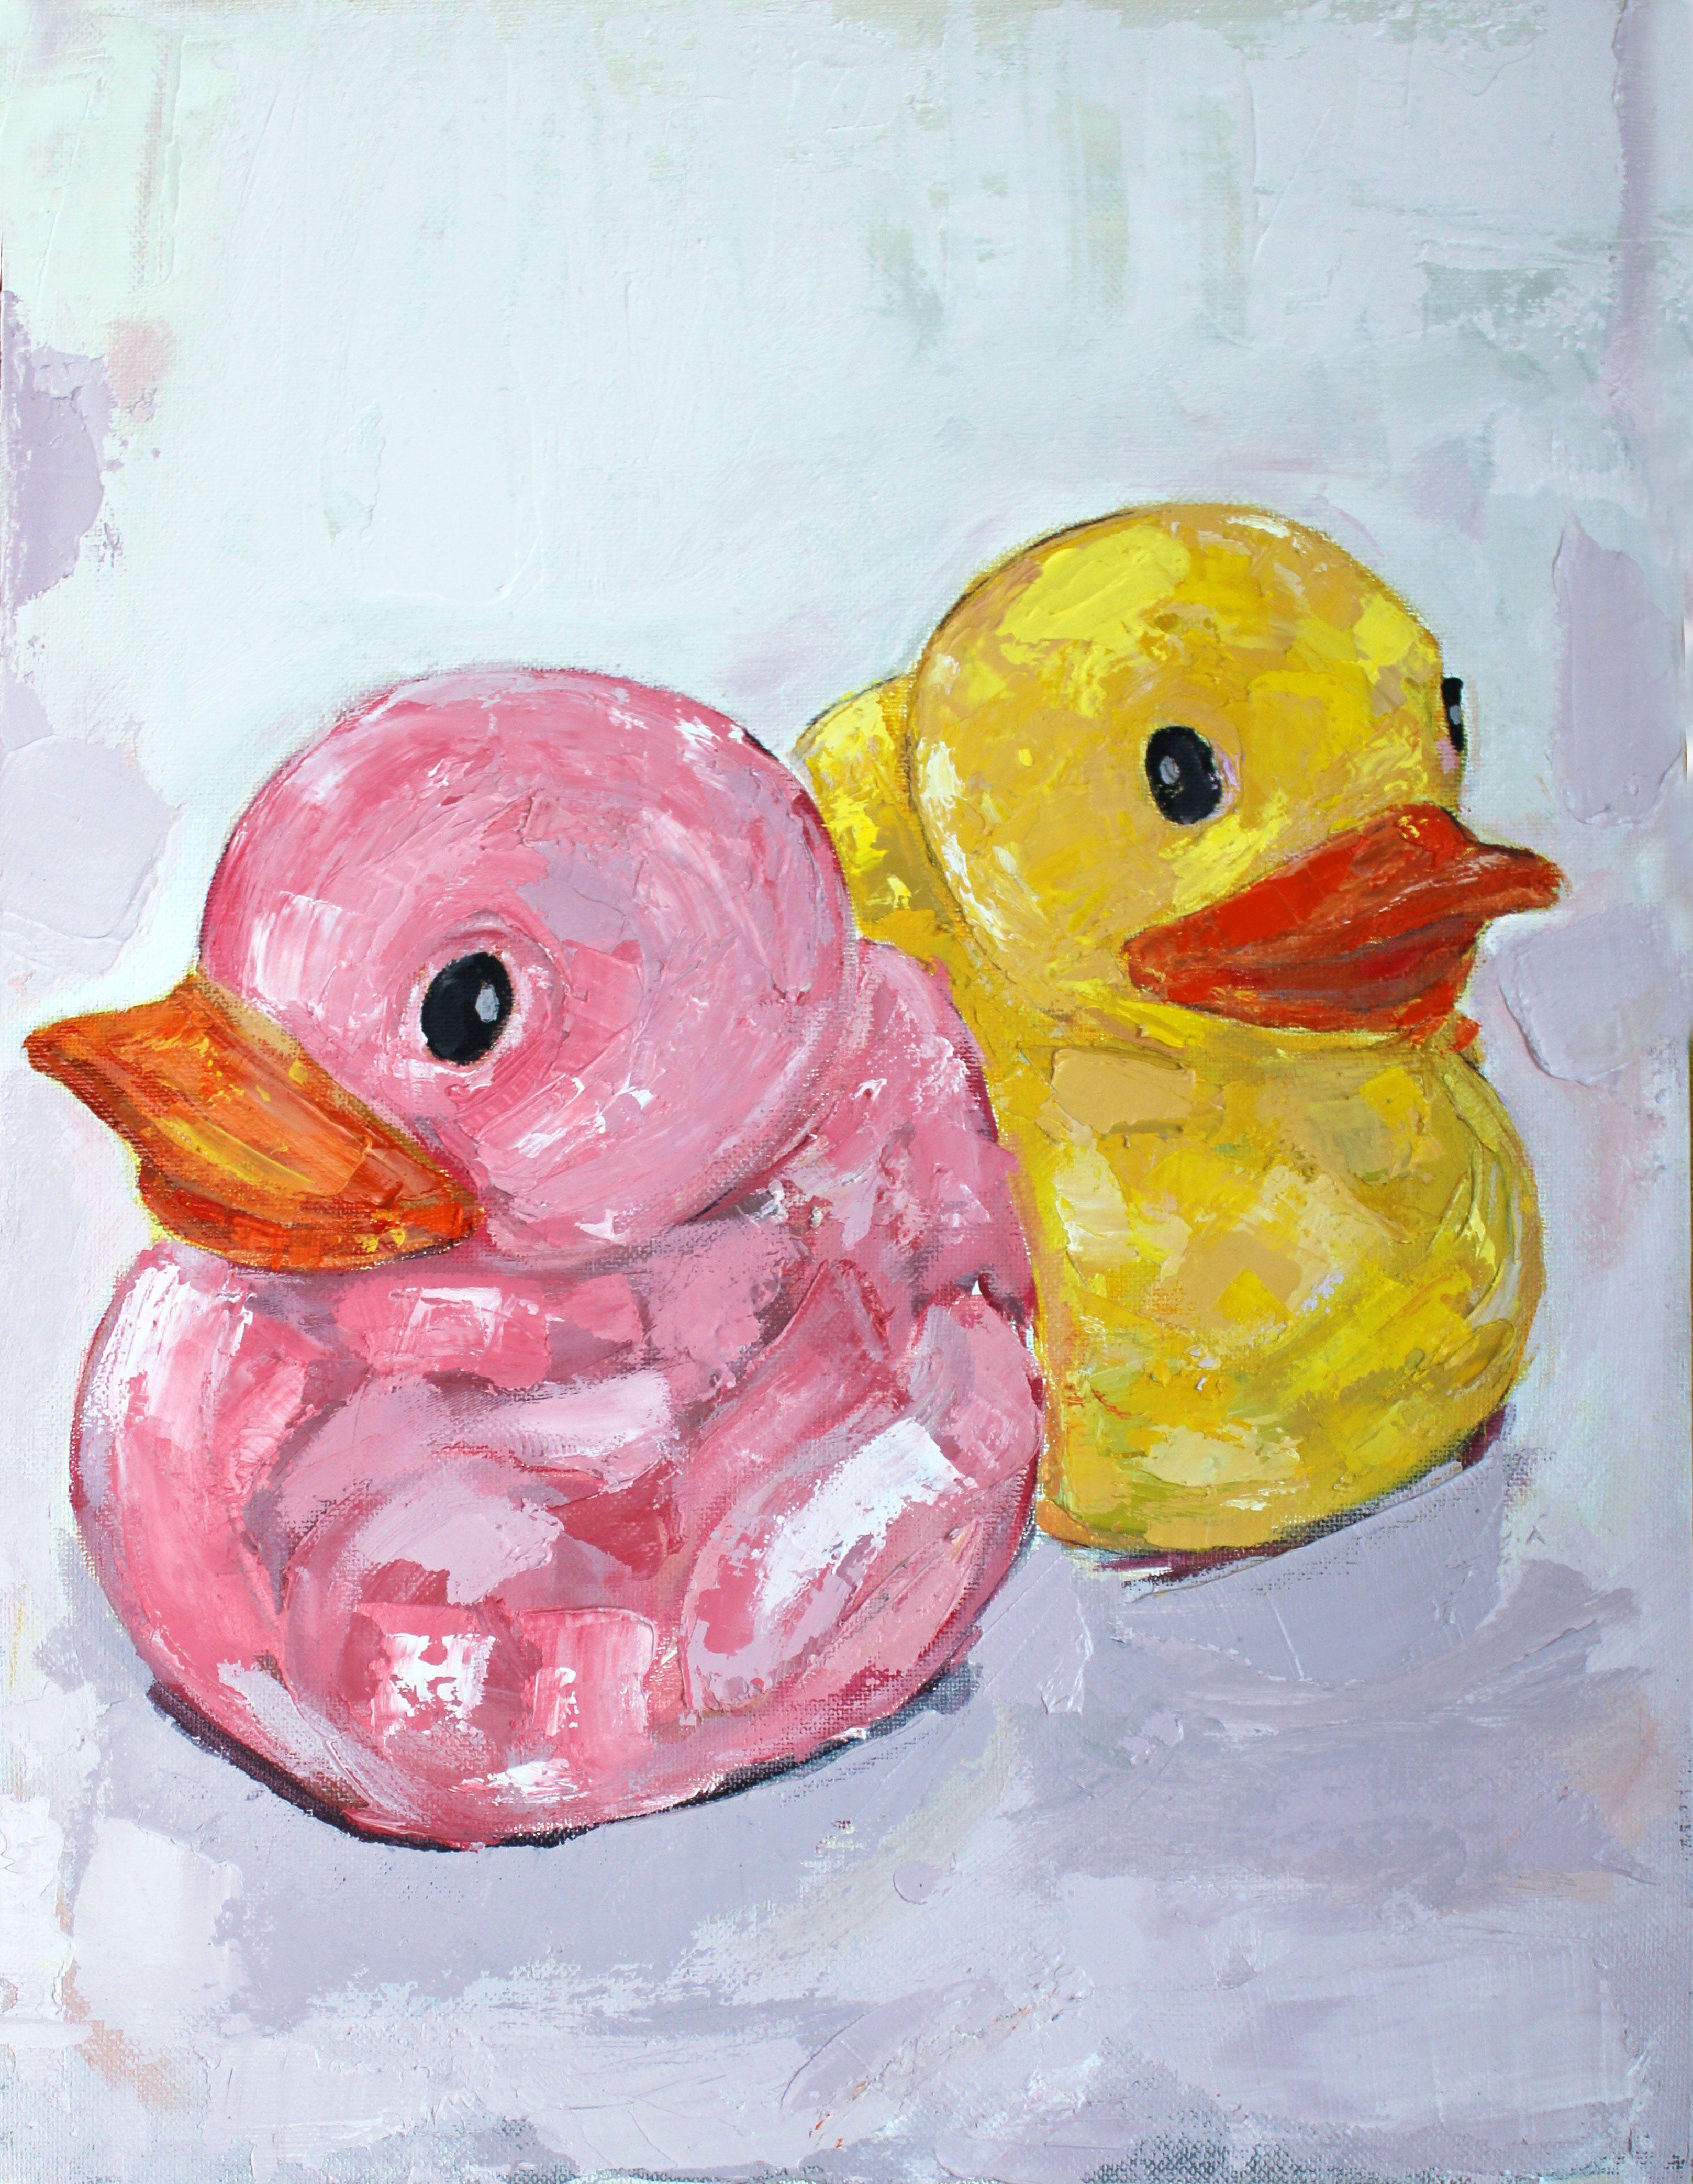 Quack Attack' This piece uses absorbing colours in a balanced composition of two joyful ducks. A blend of light and medium textures on a neutral background. This piece is on canvas board and will require a frame. A white wood box frame is